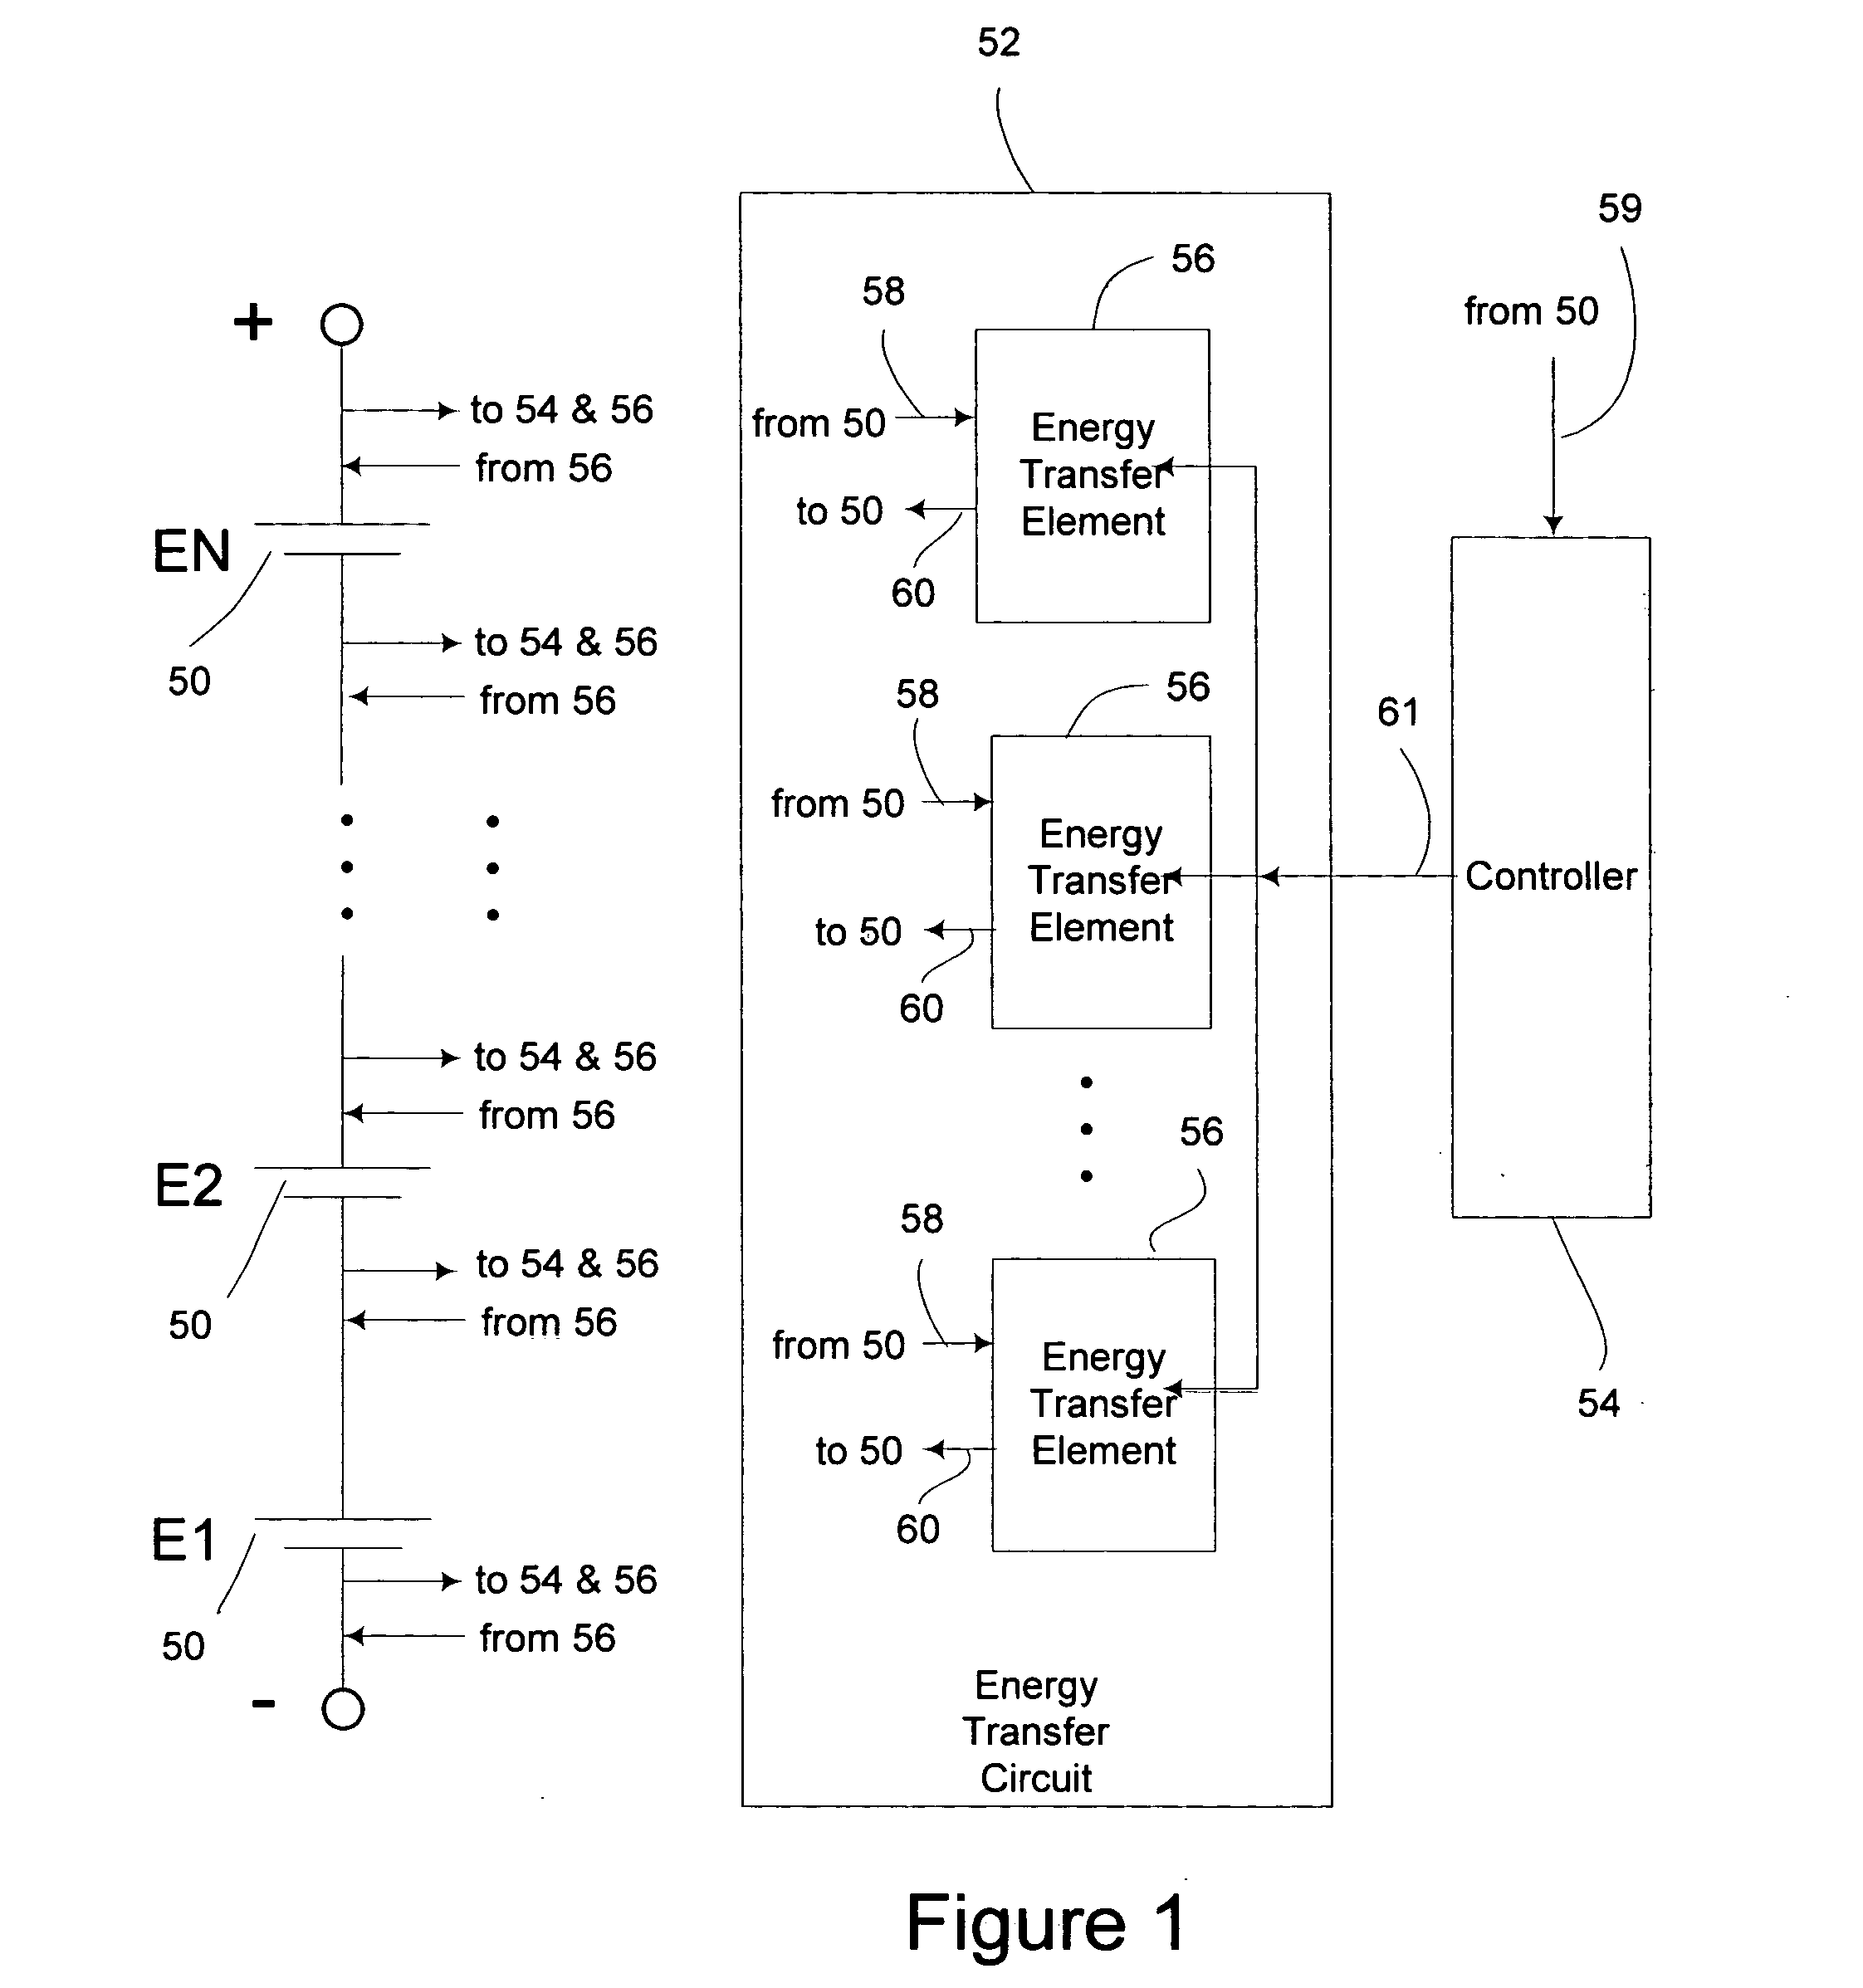 Energy transfer device for series connected energy source and storage devices